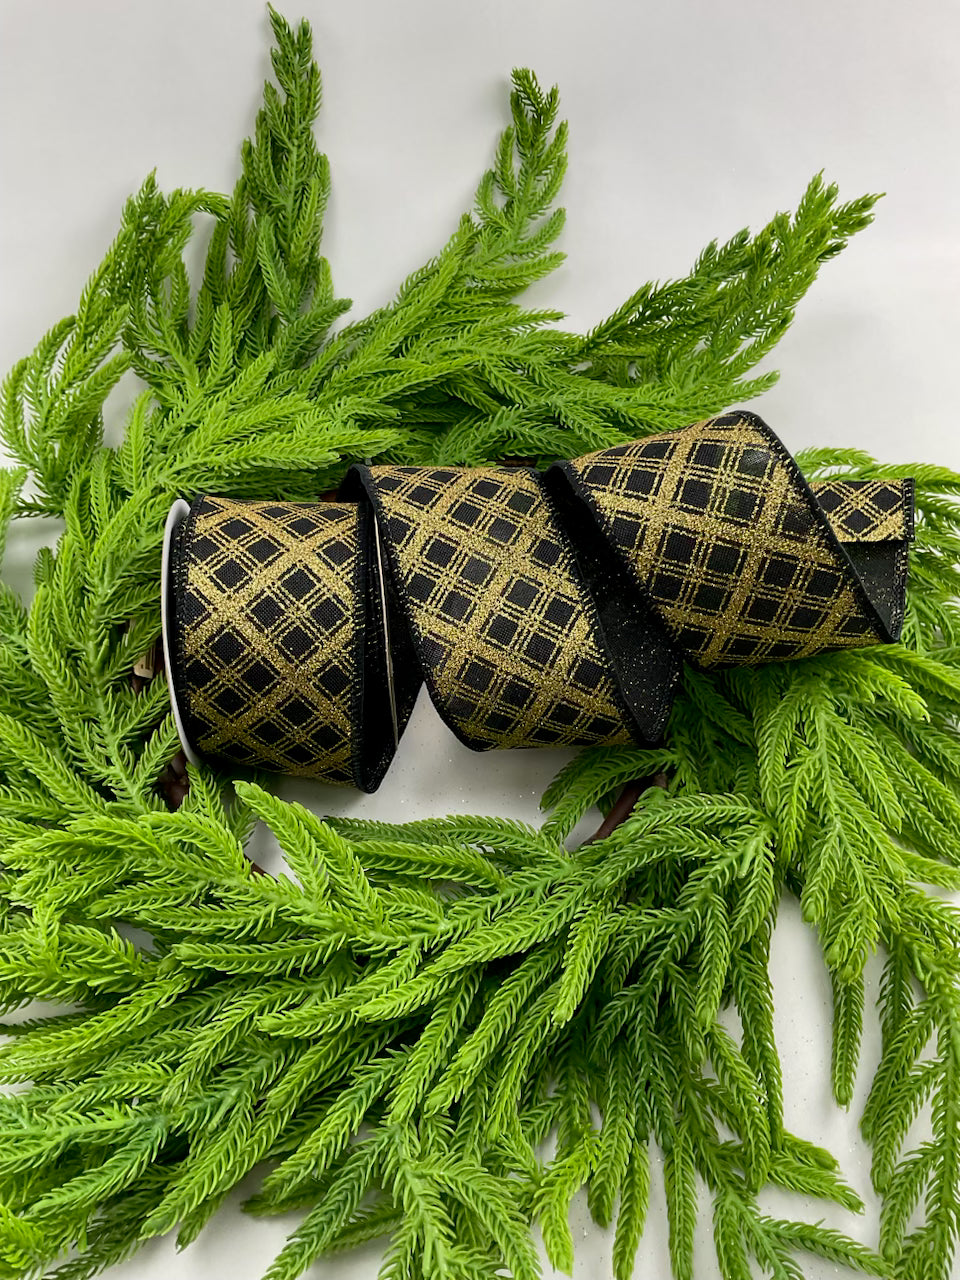 Black and gold diamond plaid wired ribbon 2.5”